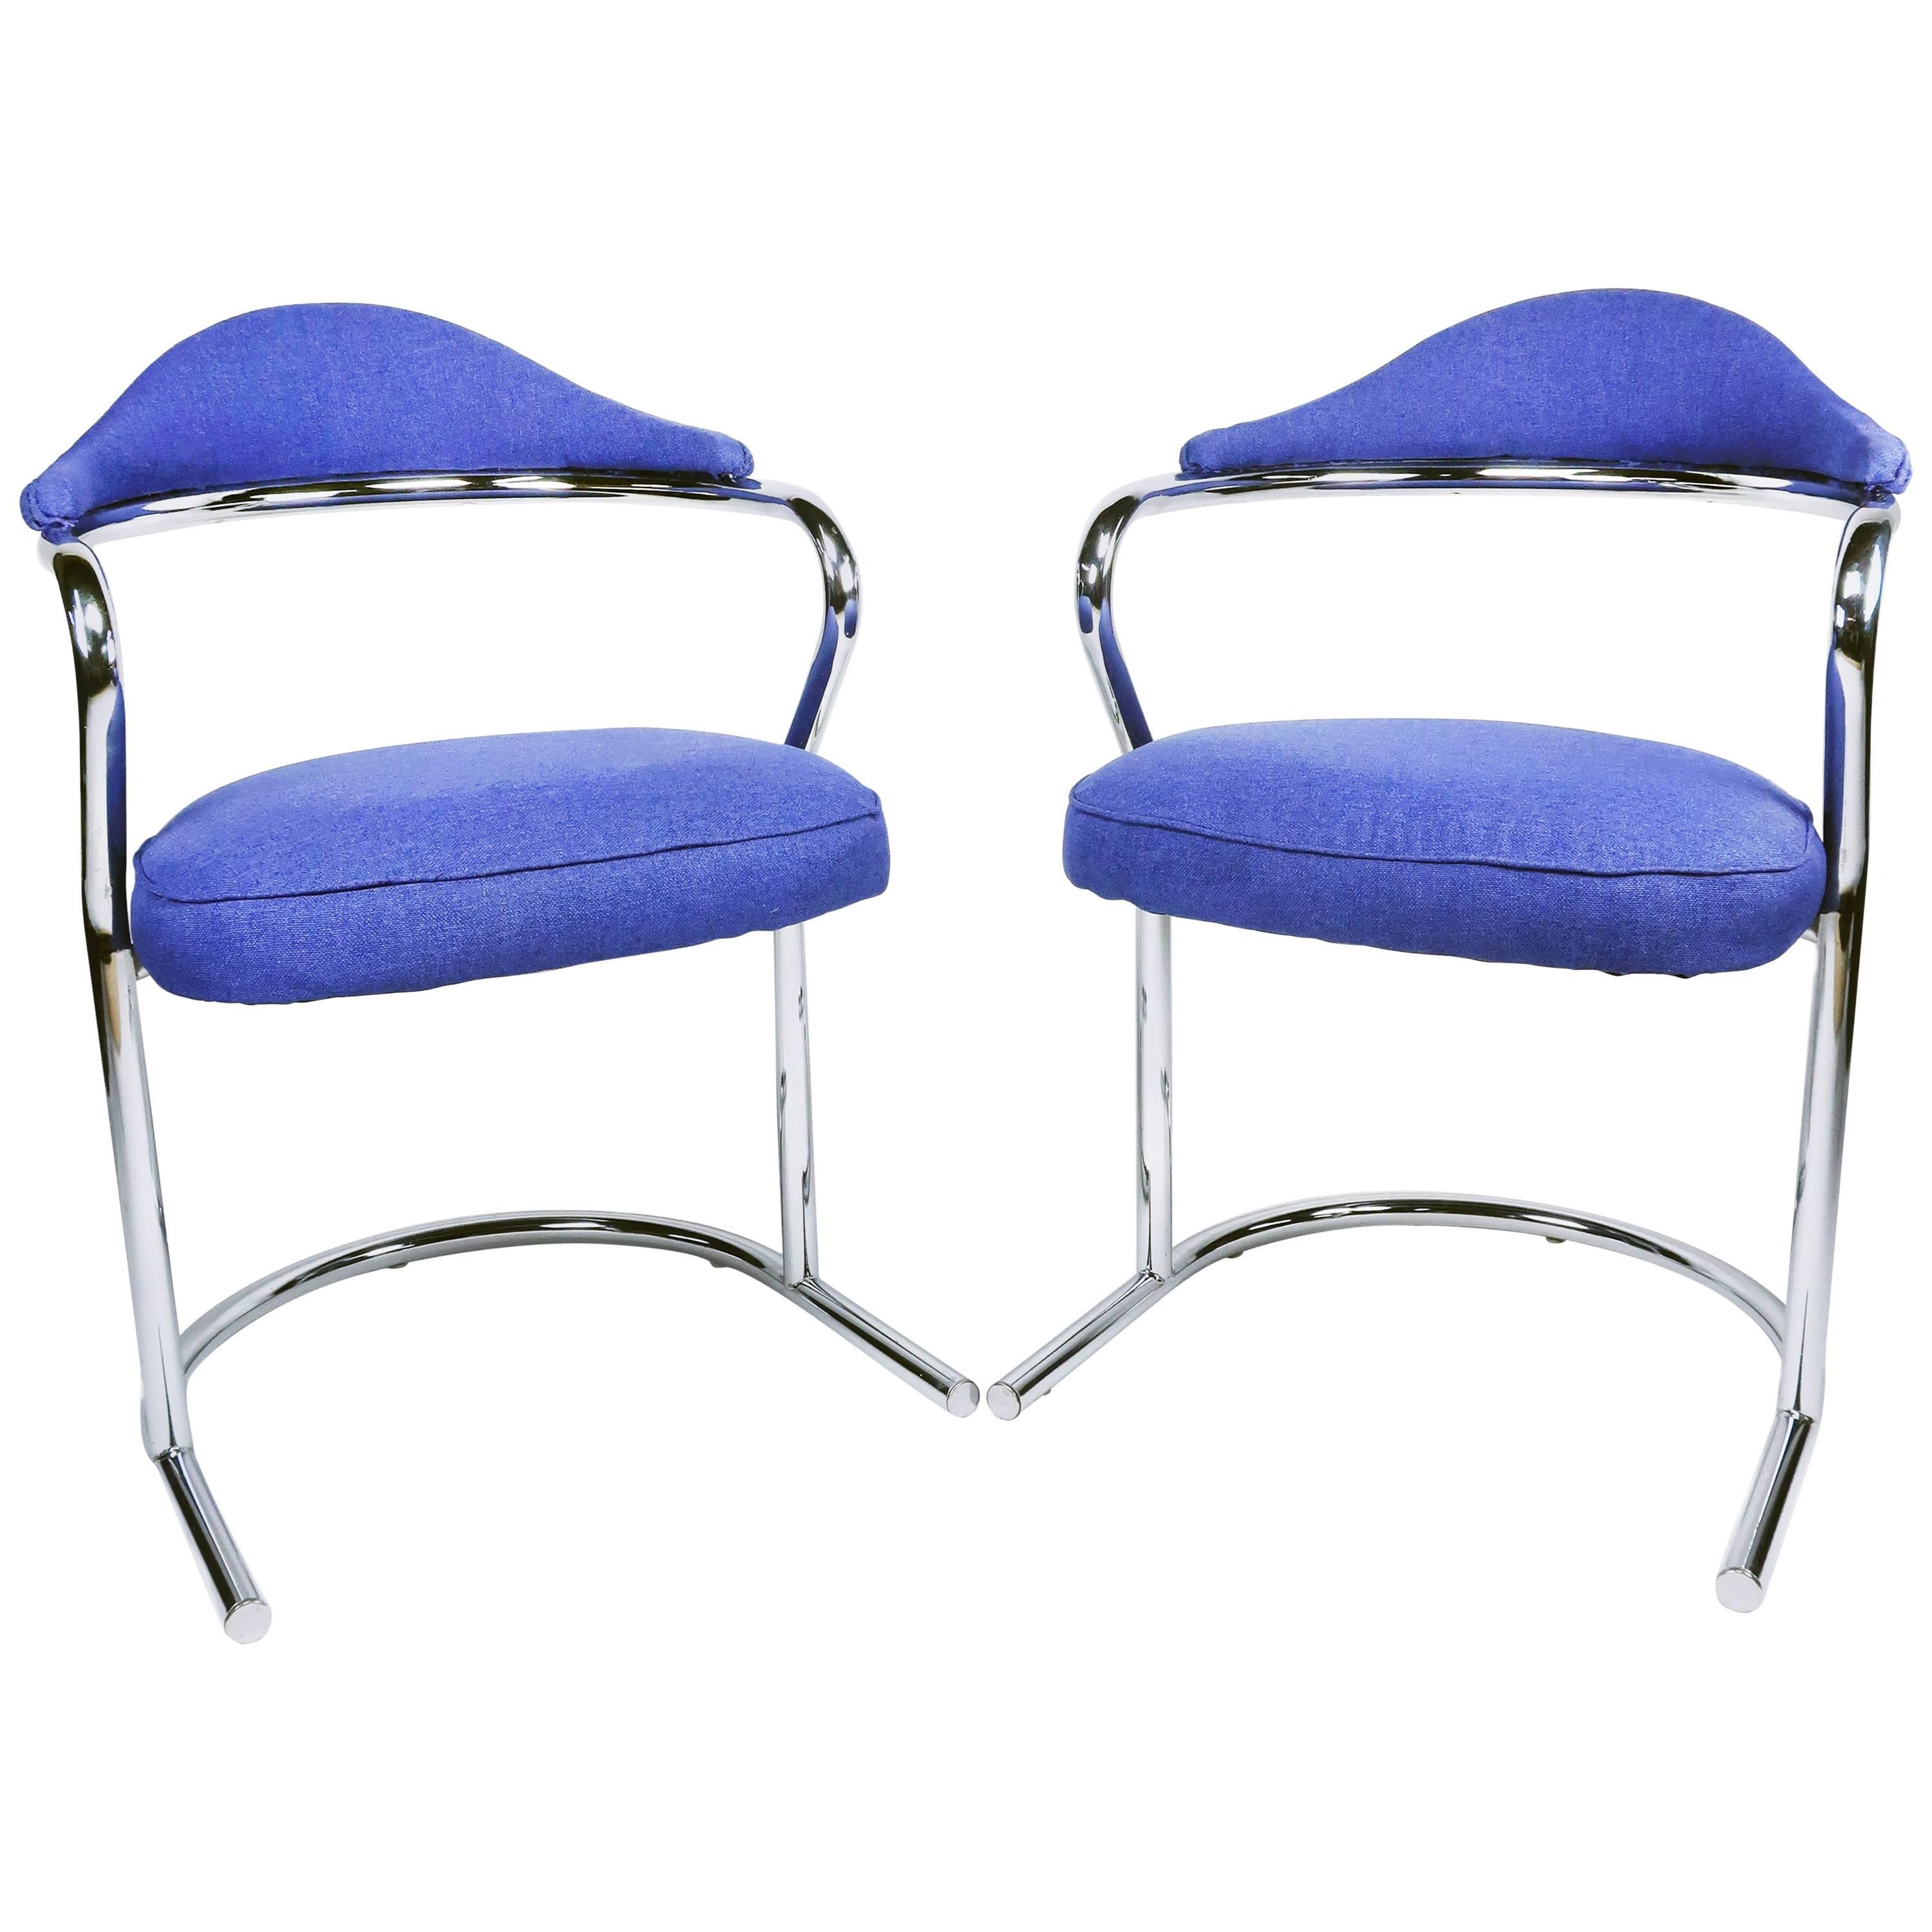 Pair of Armchairs in style of Anton Lorenz for Thonet